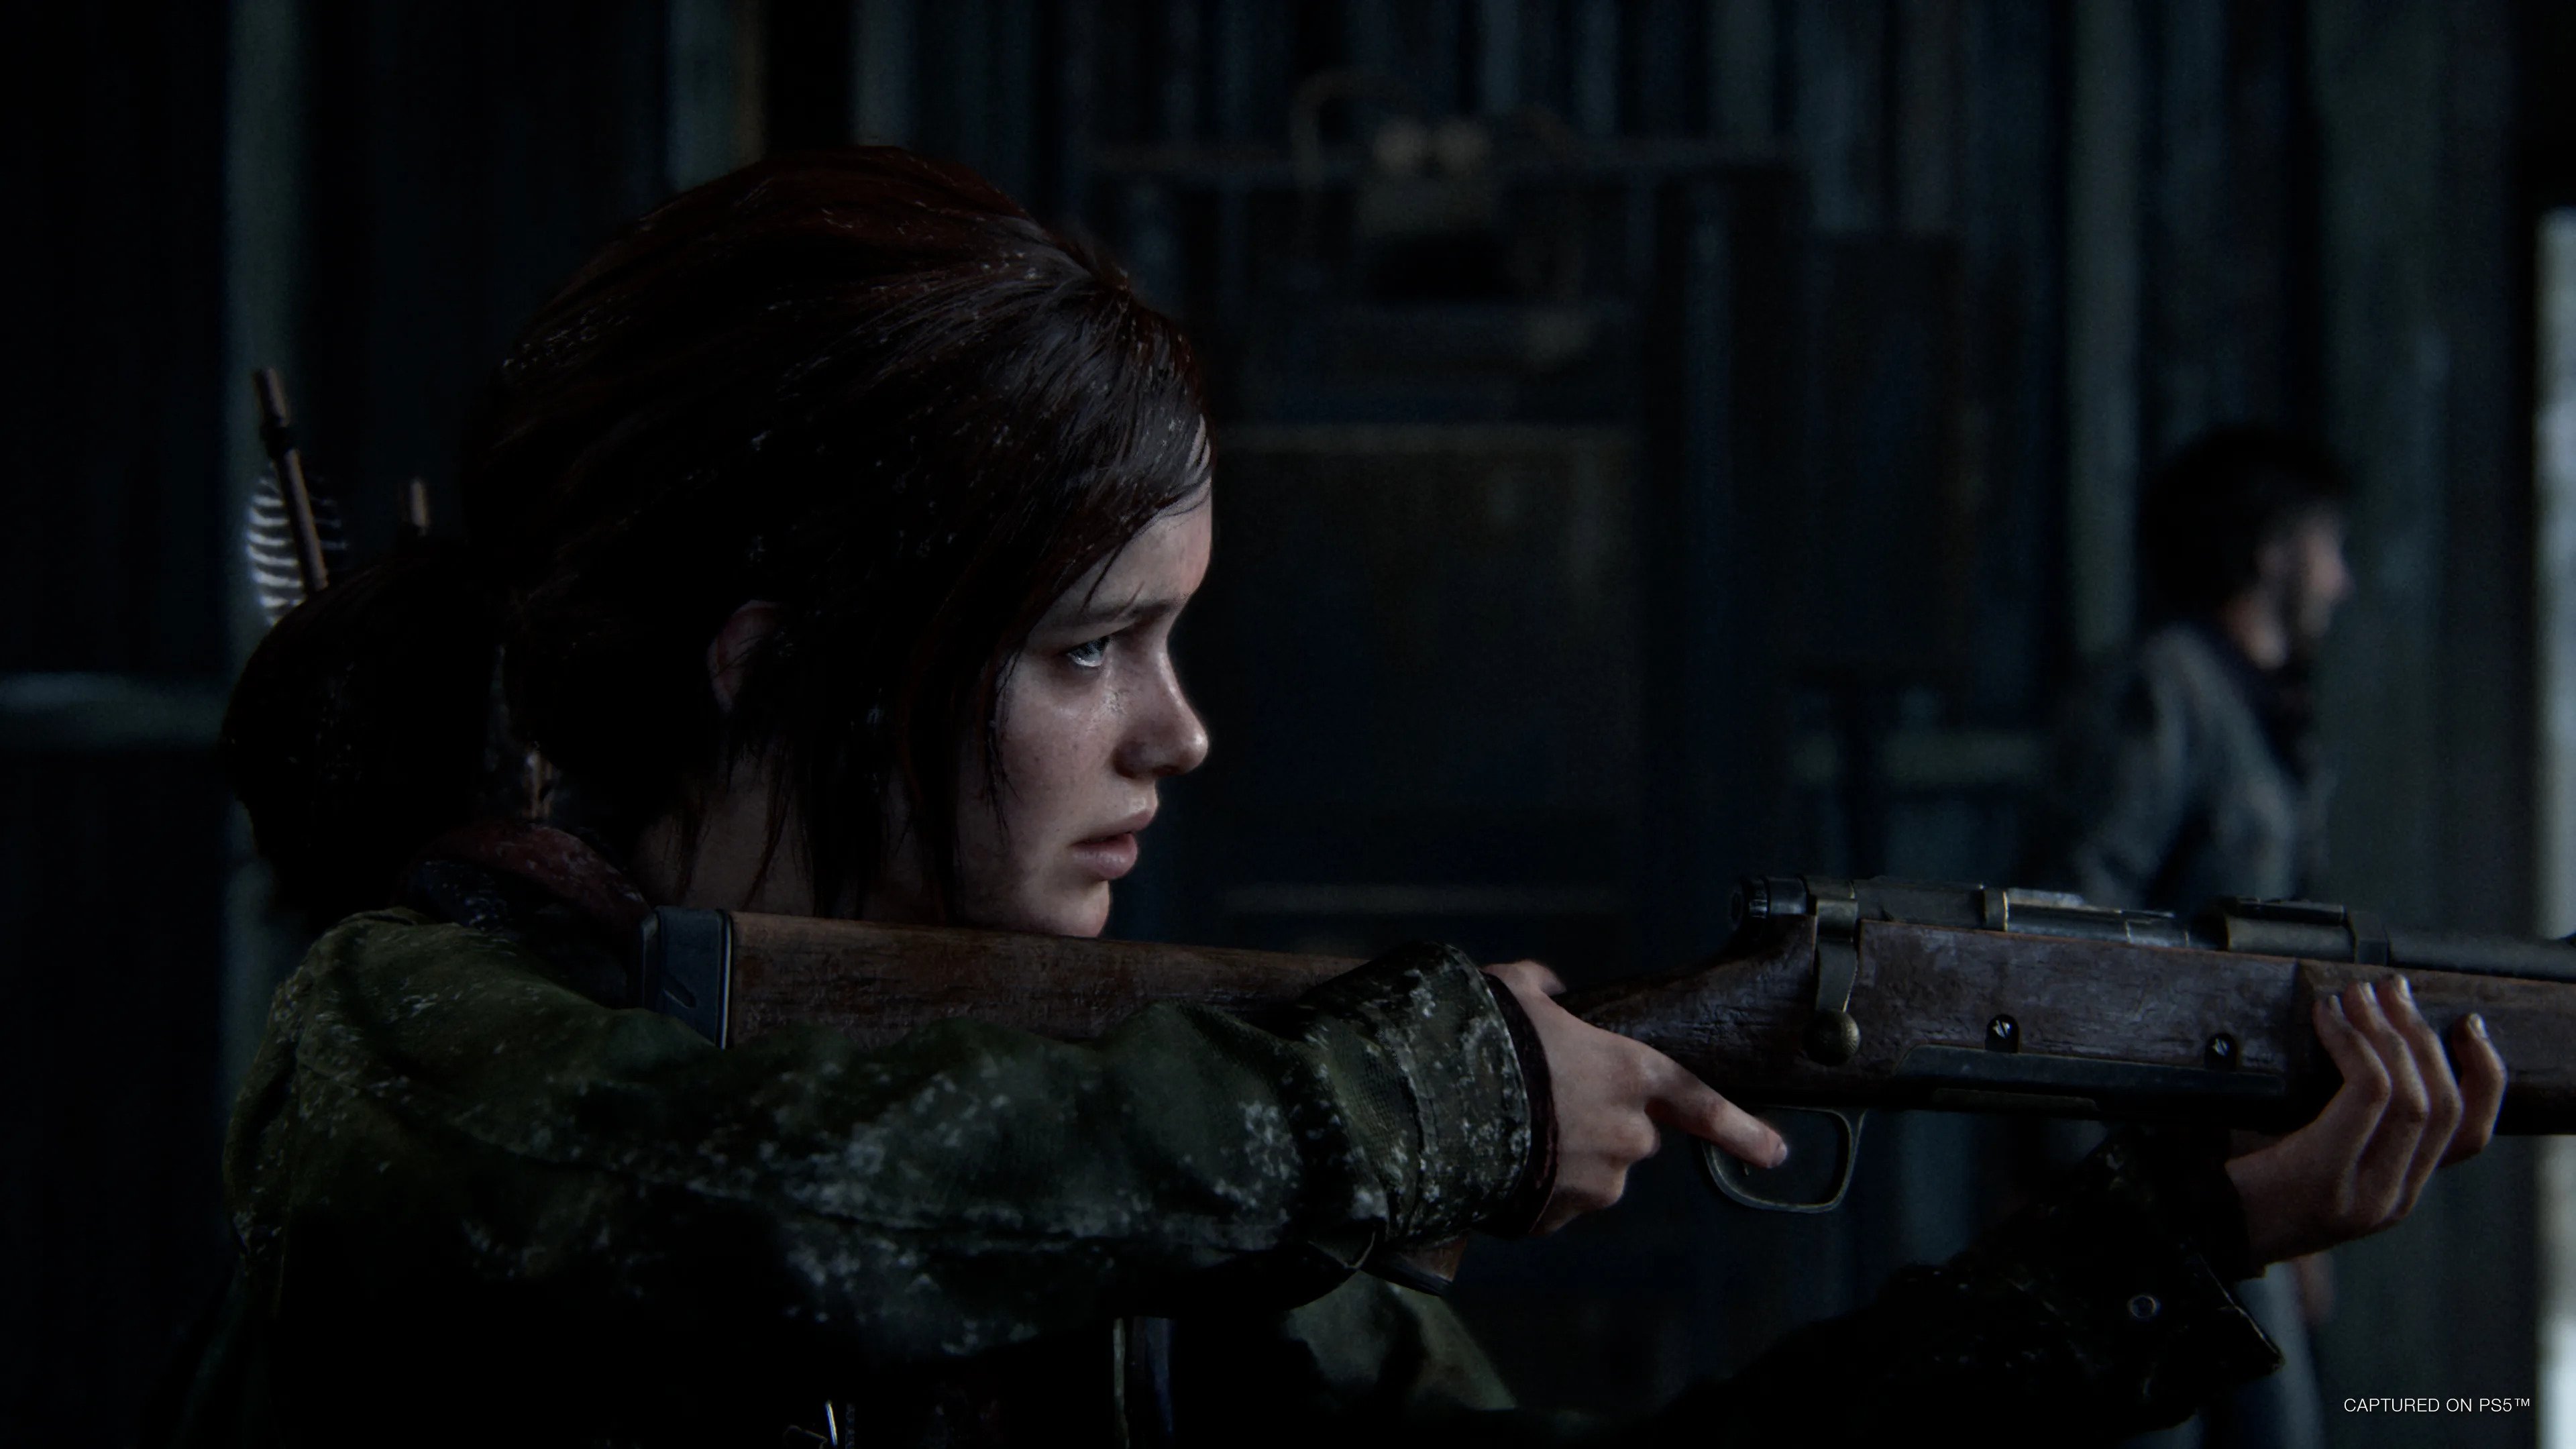 The Last of Us PC: Release date and how to pre-order the game on